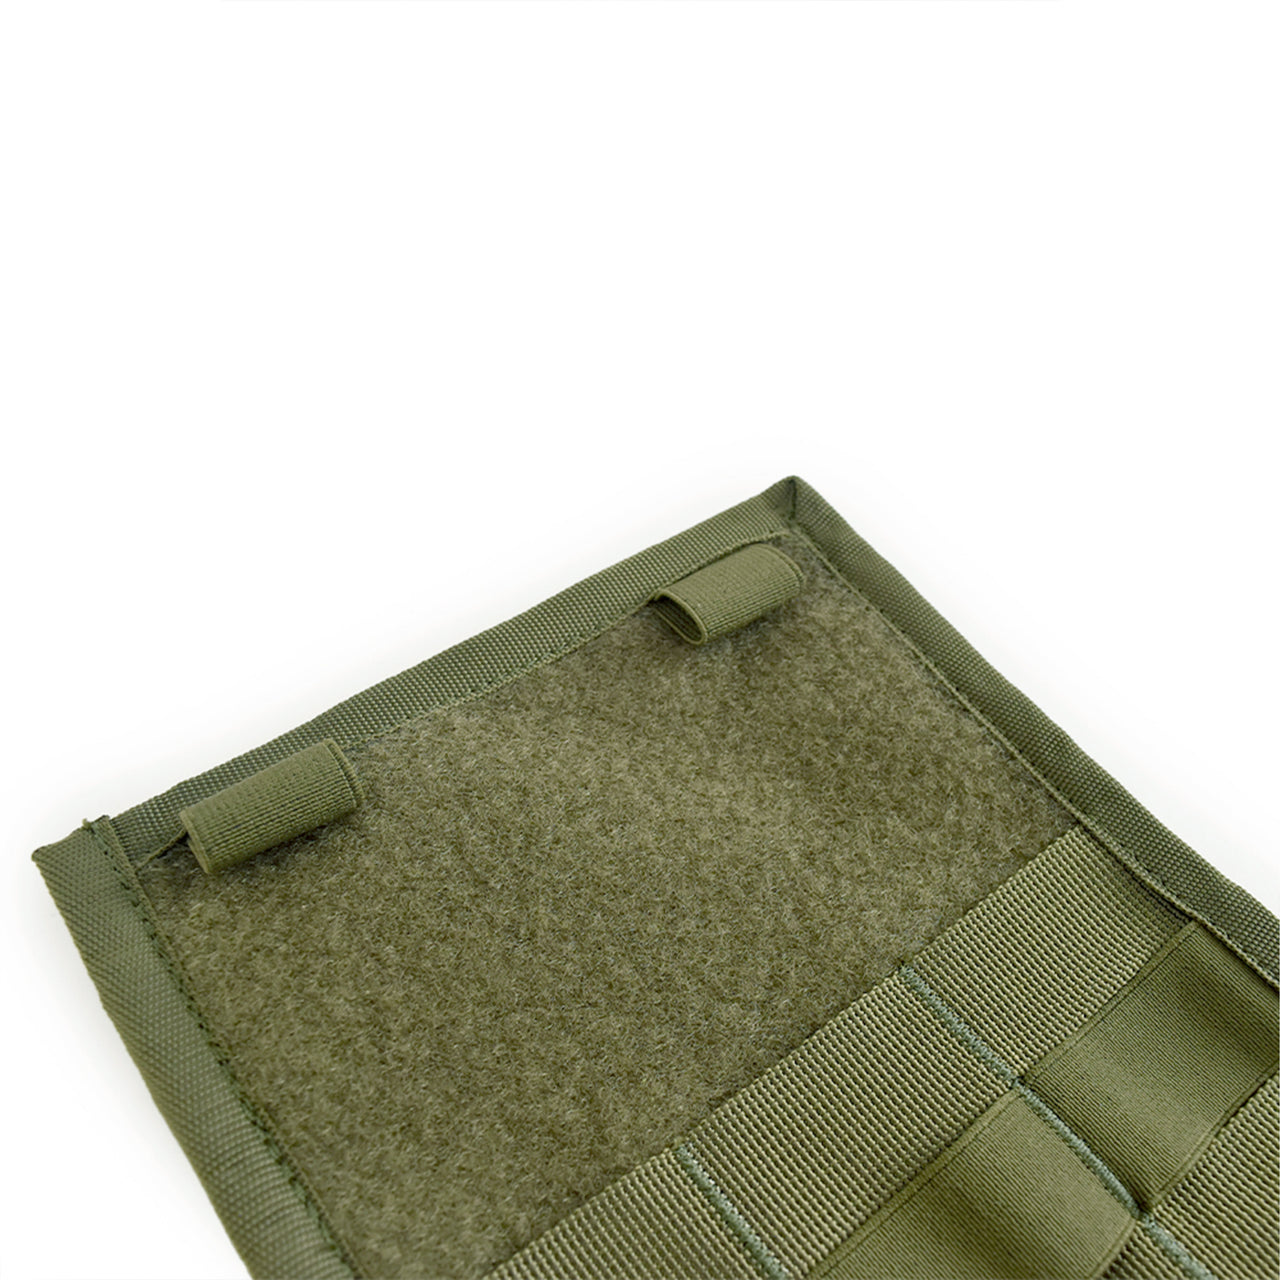 MOLLE Car Visor Organiser with Double Loop Patches - Olive Green